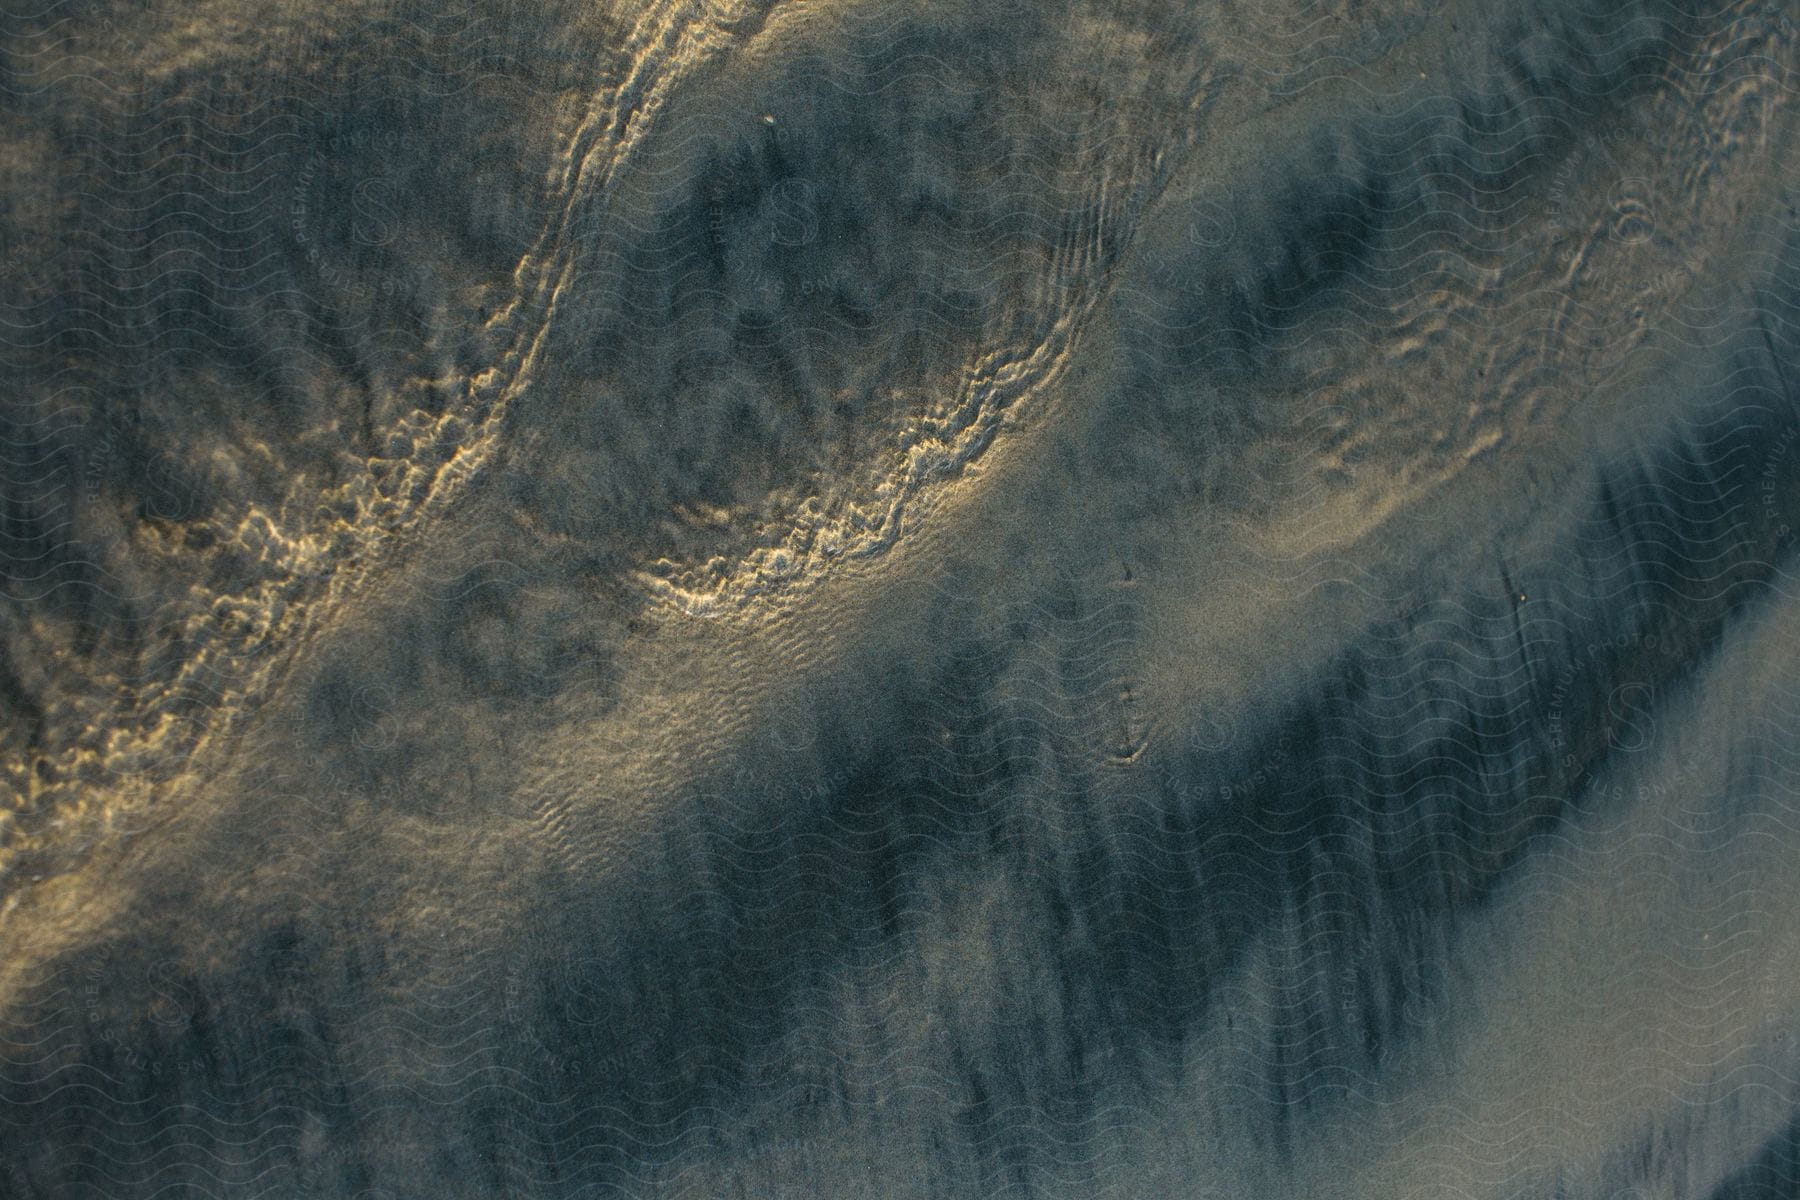 Earth's surface seen from above with ripples and shadows that create an abstract and natural visual effect.